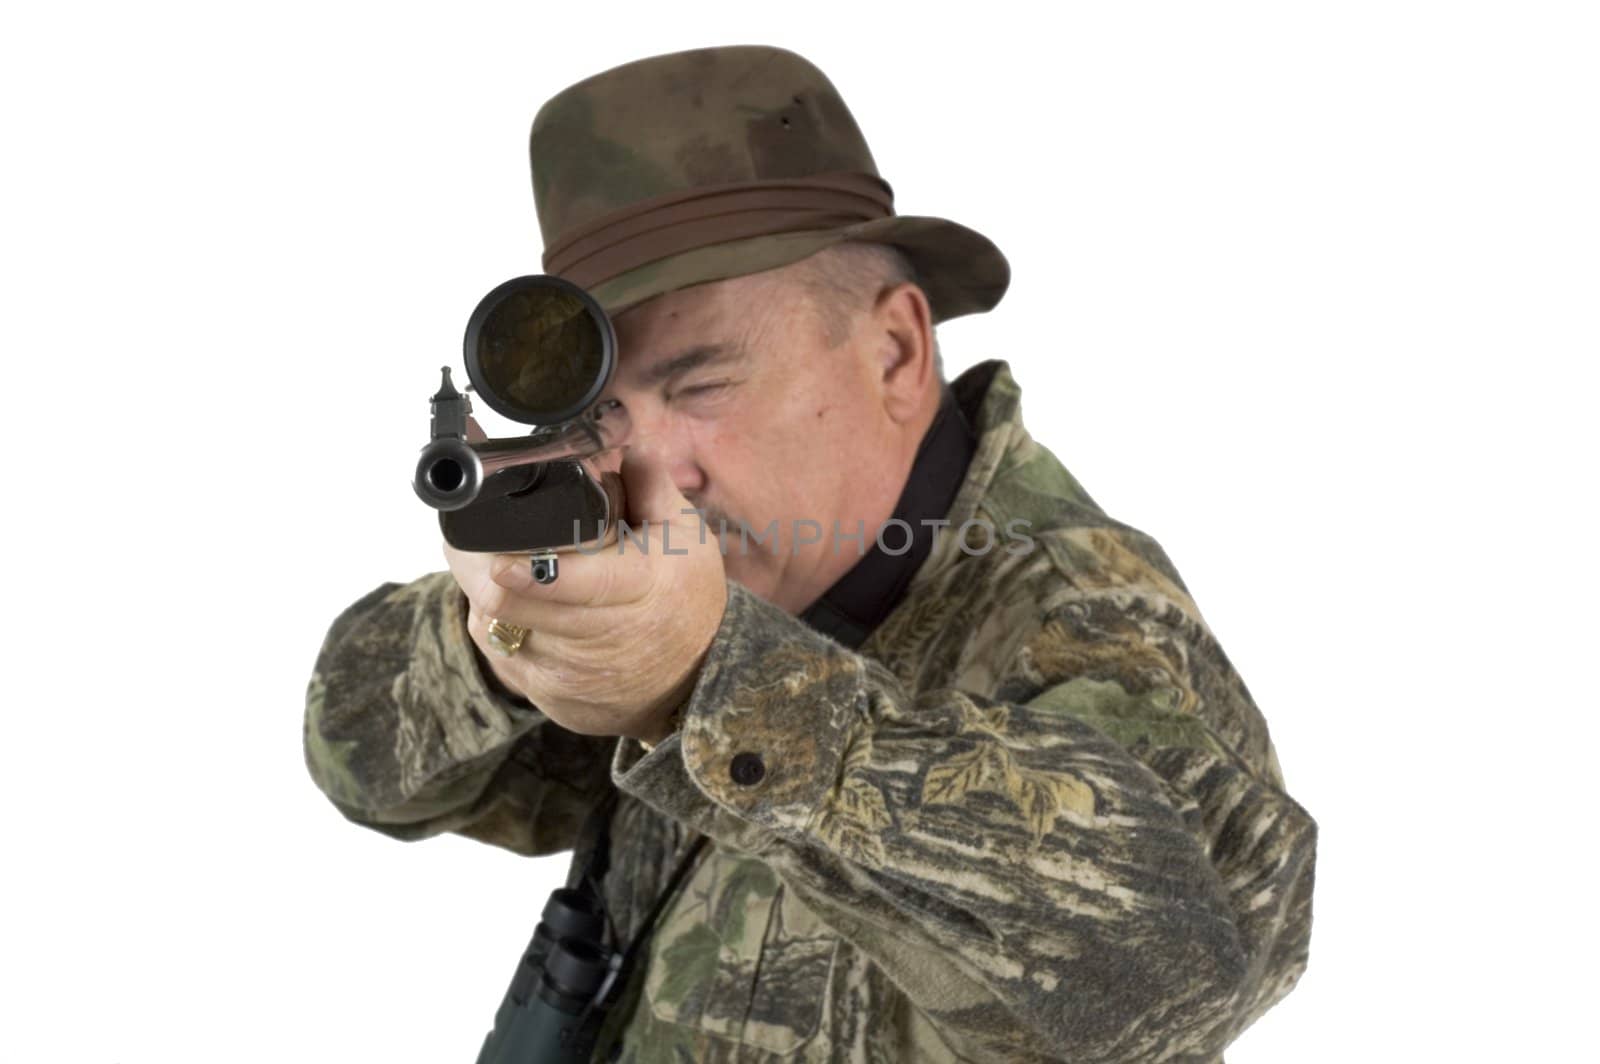 Man in camouflage clothing with rifle taking aim at target on a white background